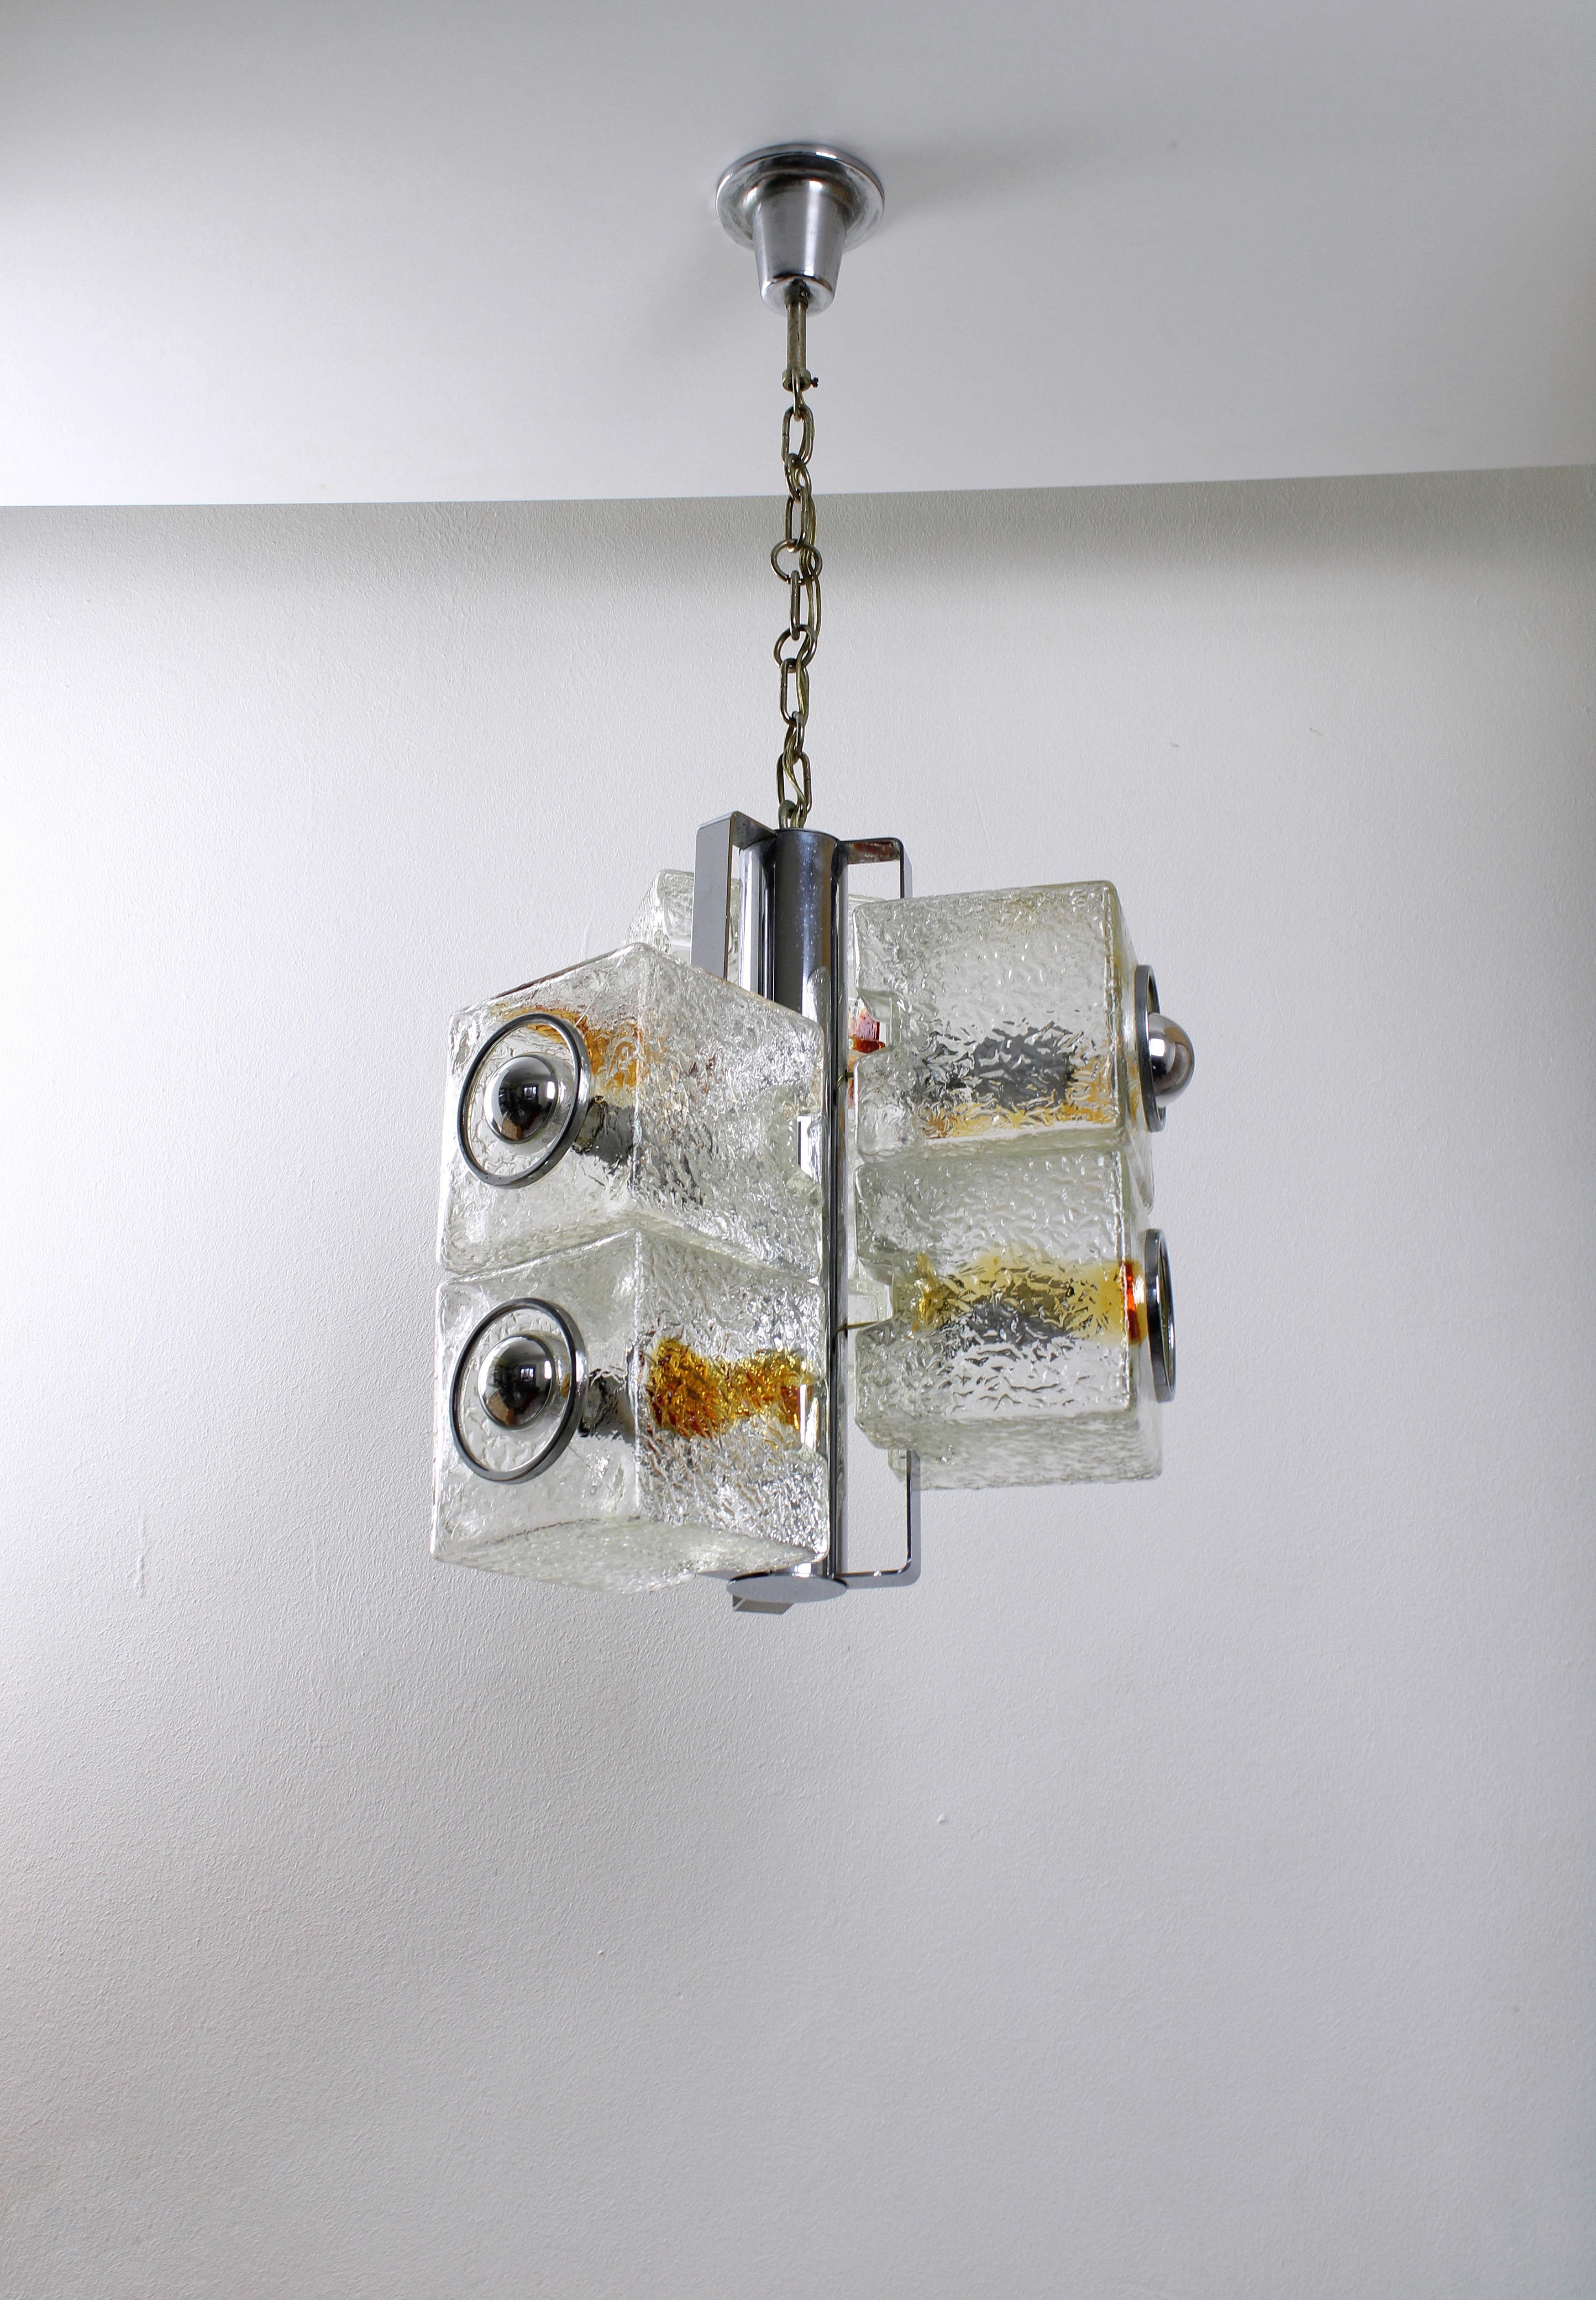 Large sculptural pendant lamp shaped with six glass cubes, held together by a chrome plated metal structure. Possibly designed by Toni Zuccheri. Manufactured by VeArt in Italy during the 1960s. The “Cube” series was produced in many different